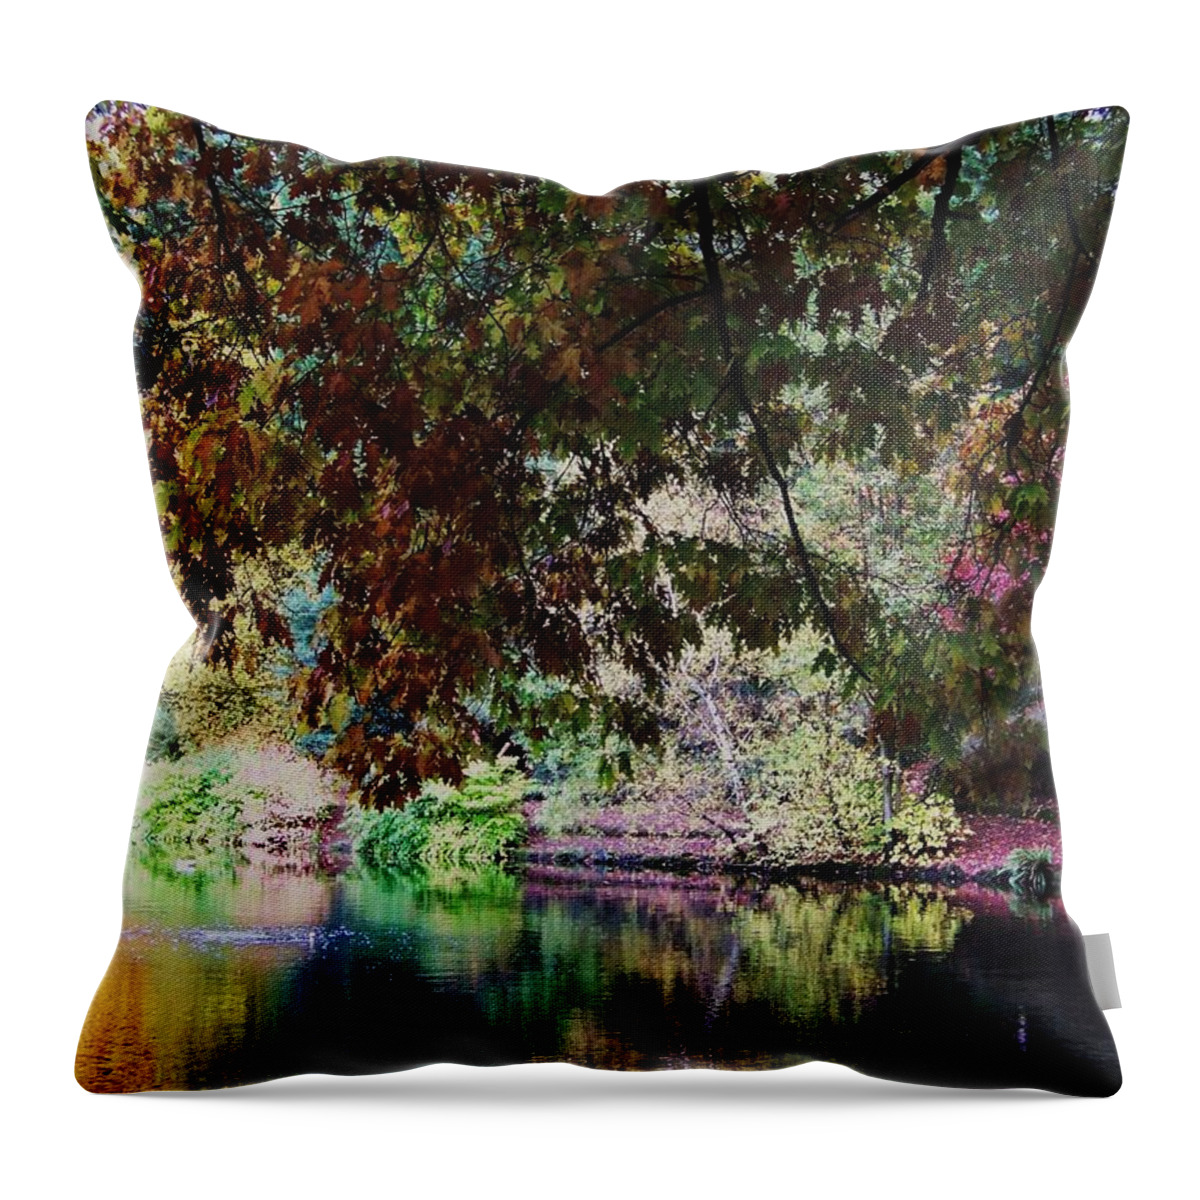 Lavender Throw Pillow featuring the photograph Lavender Park by Julie Rauscher